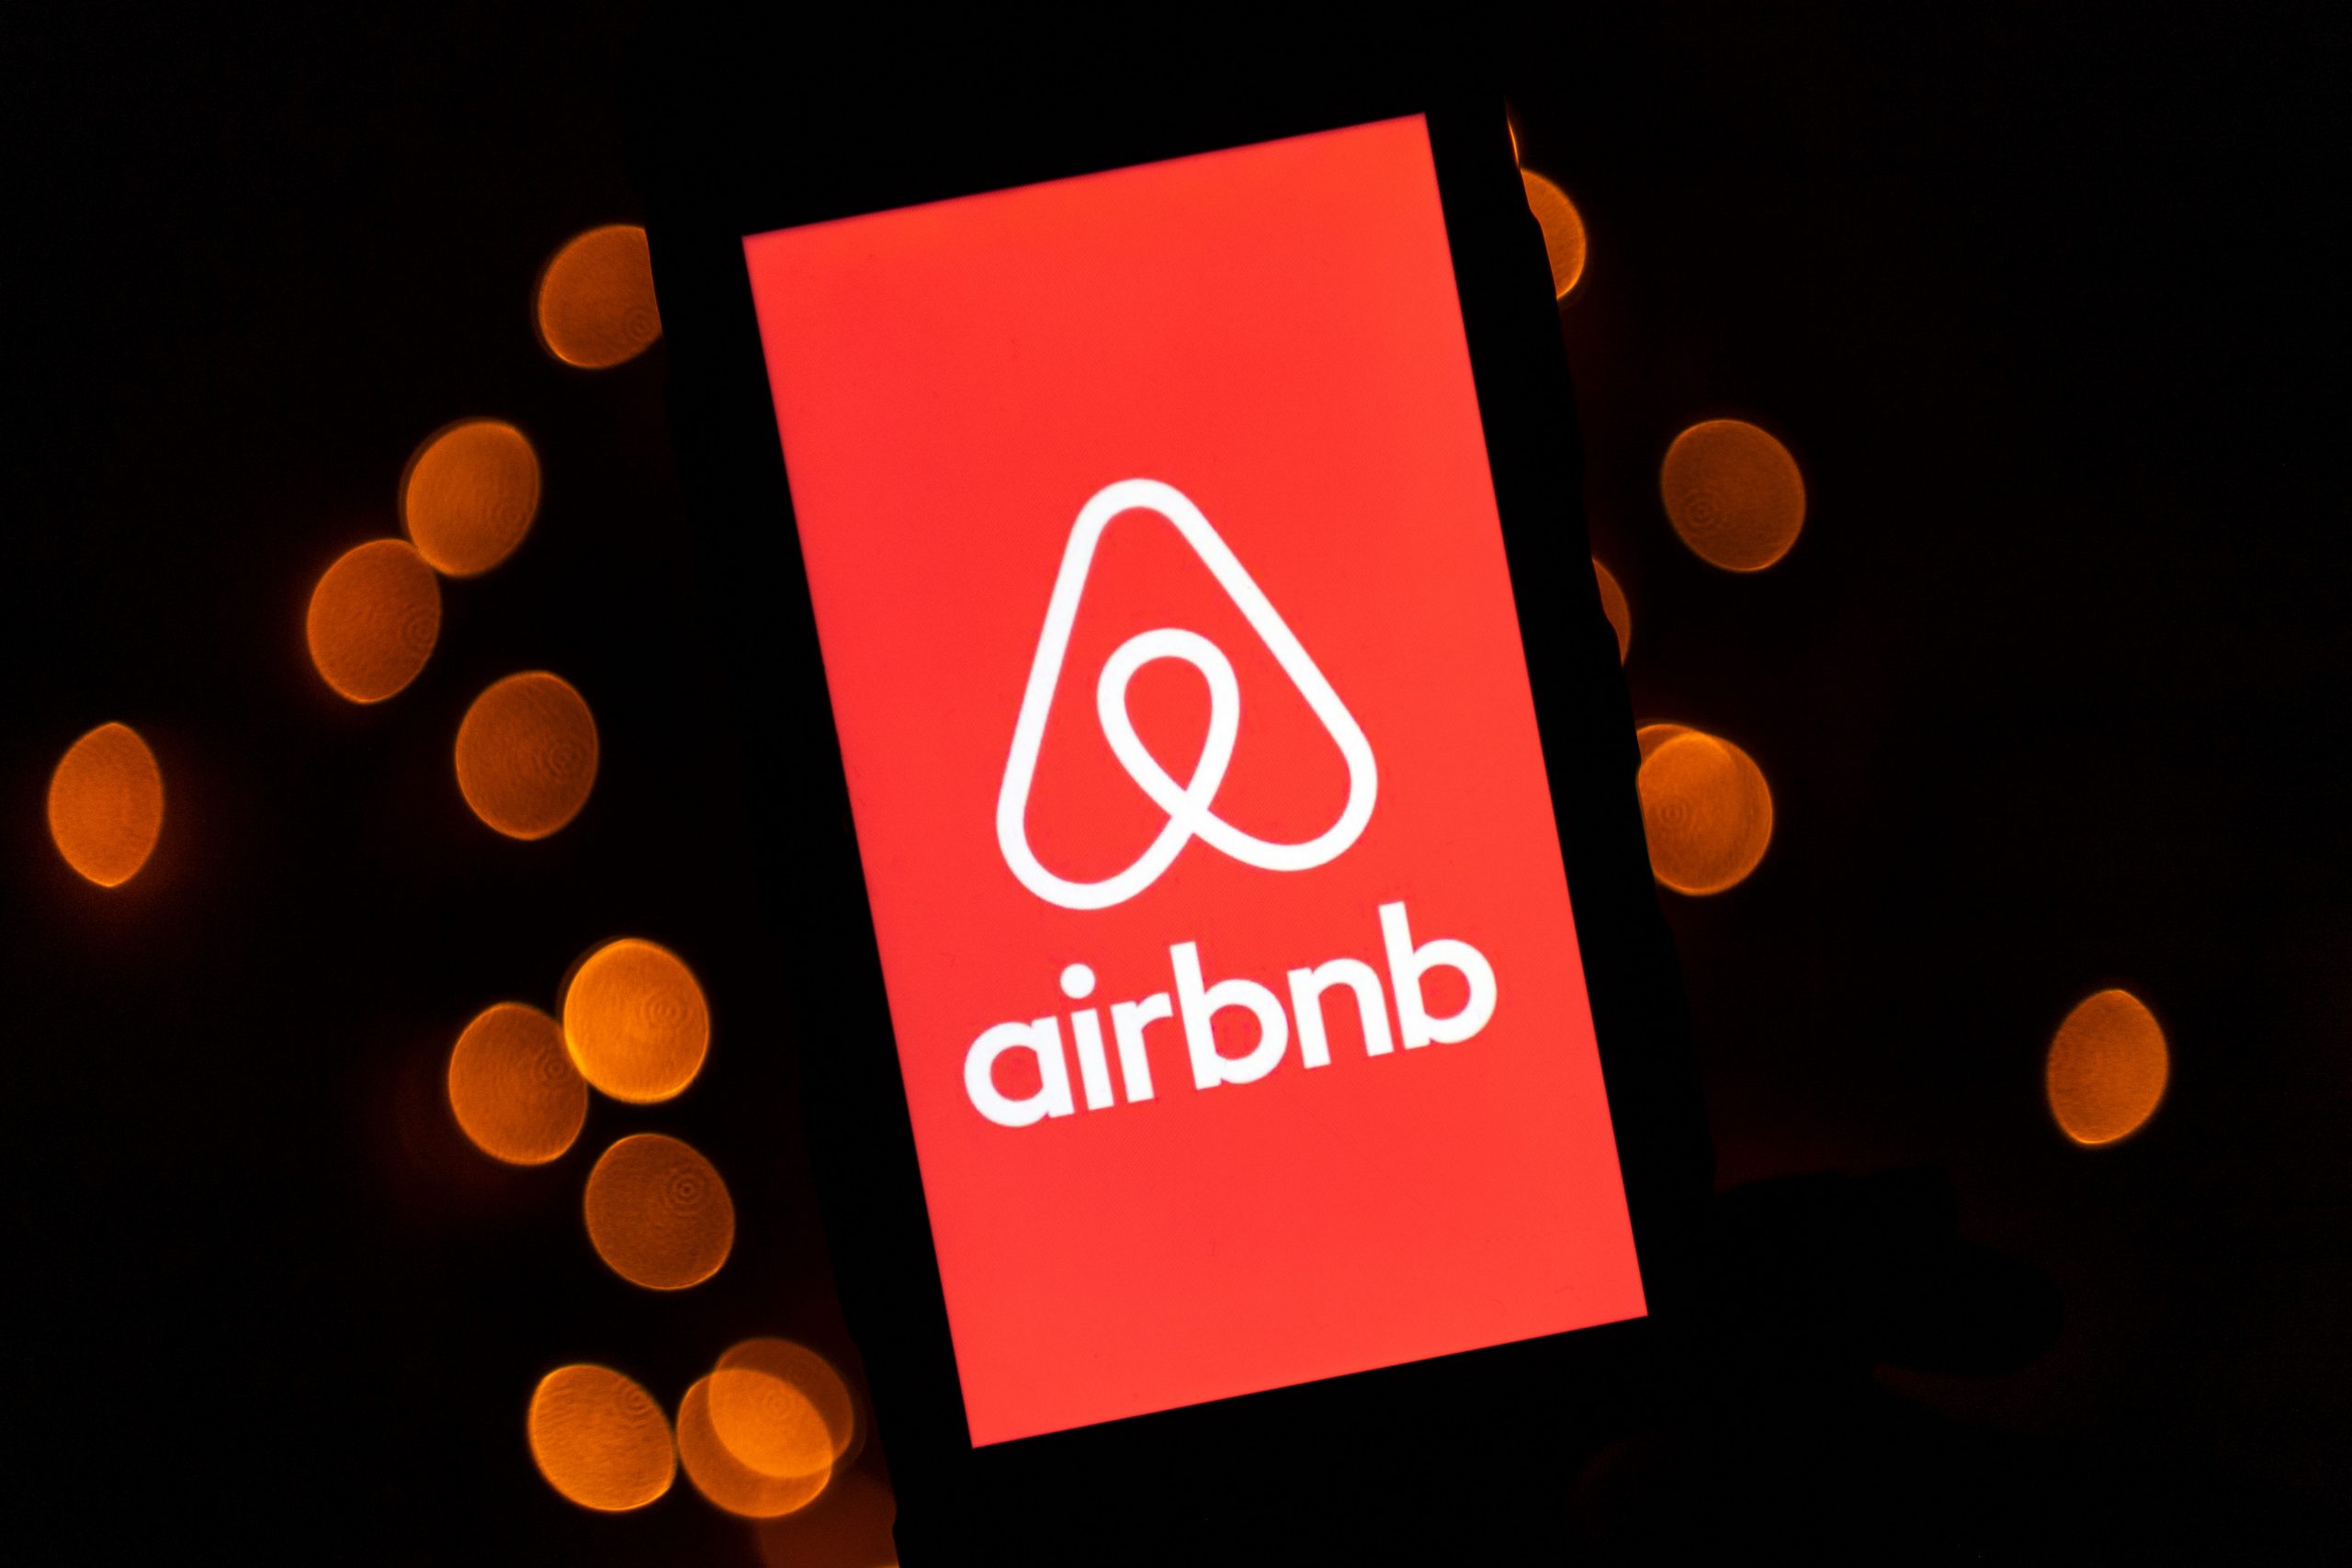 Airbnb files for initial public offering